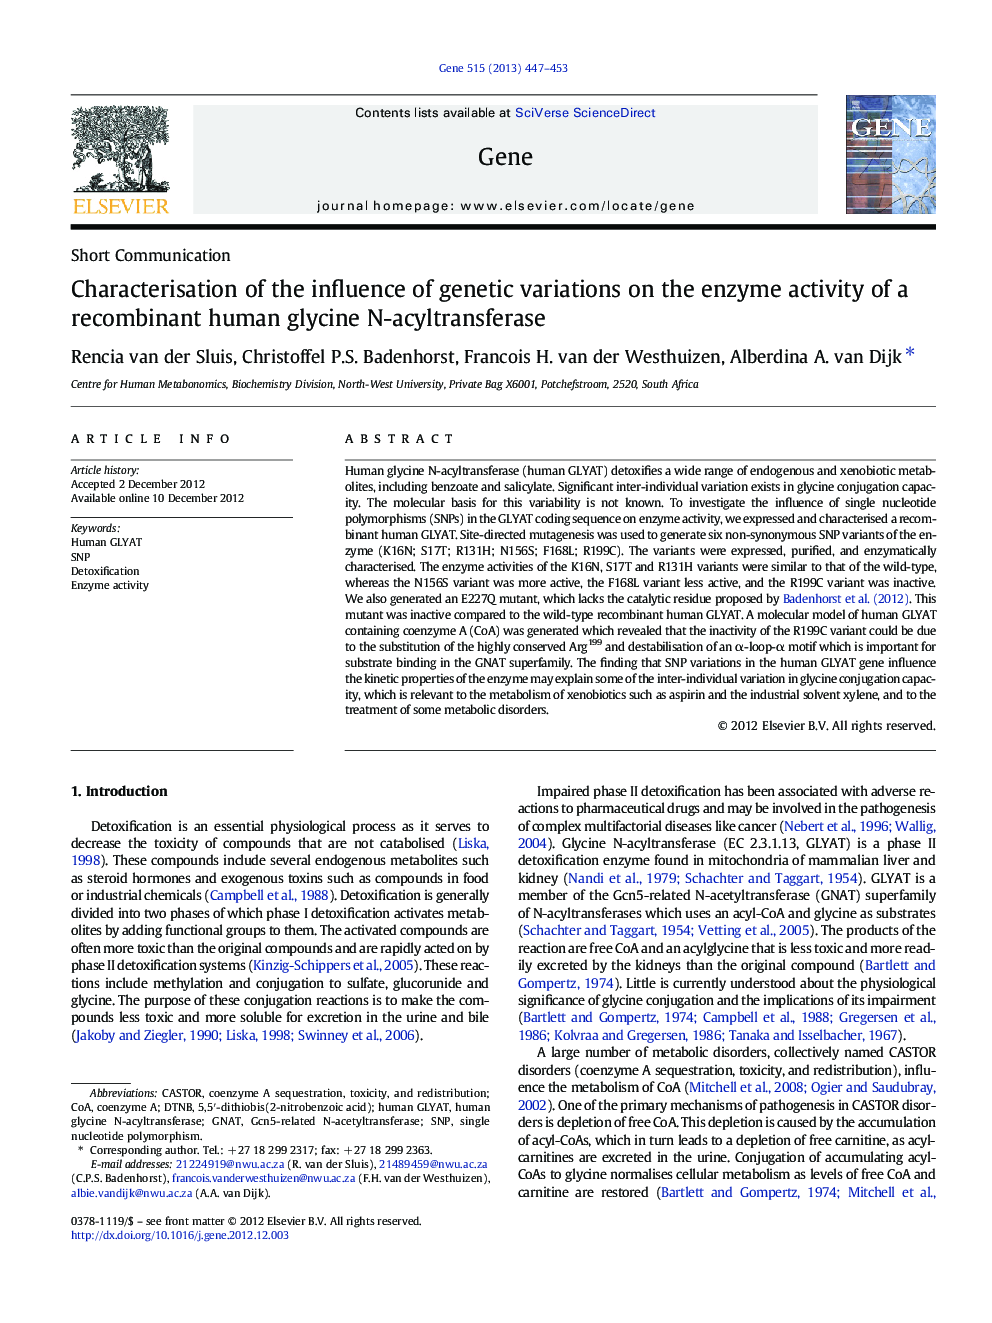 Short CommunicationCharacterisation of the influence of genetic variations on the enzyme activity of a recombinant human glycine N-acyltransferase